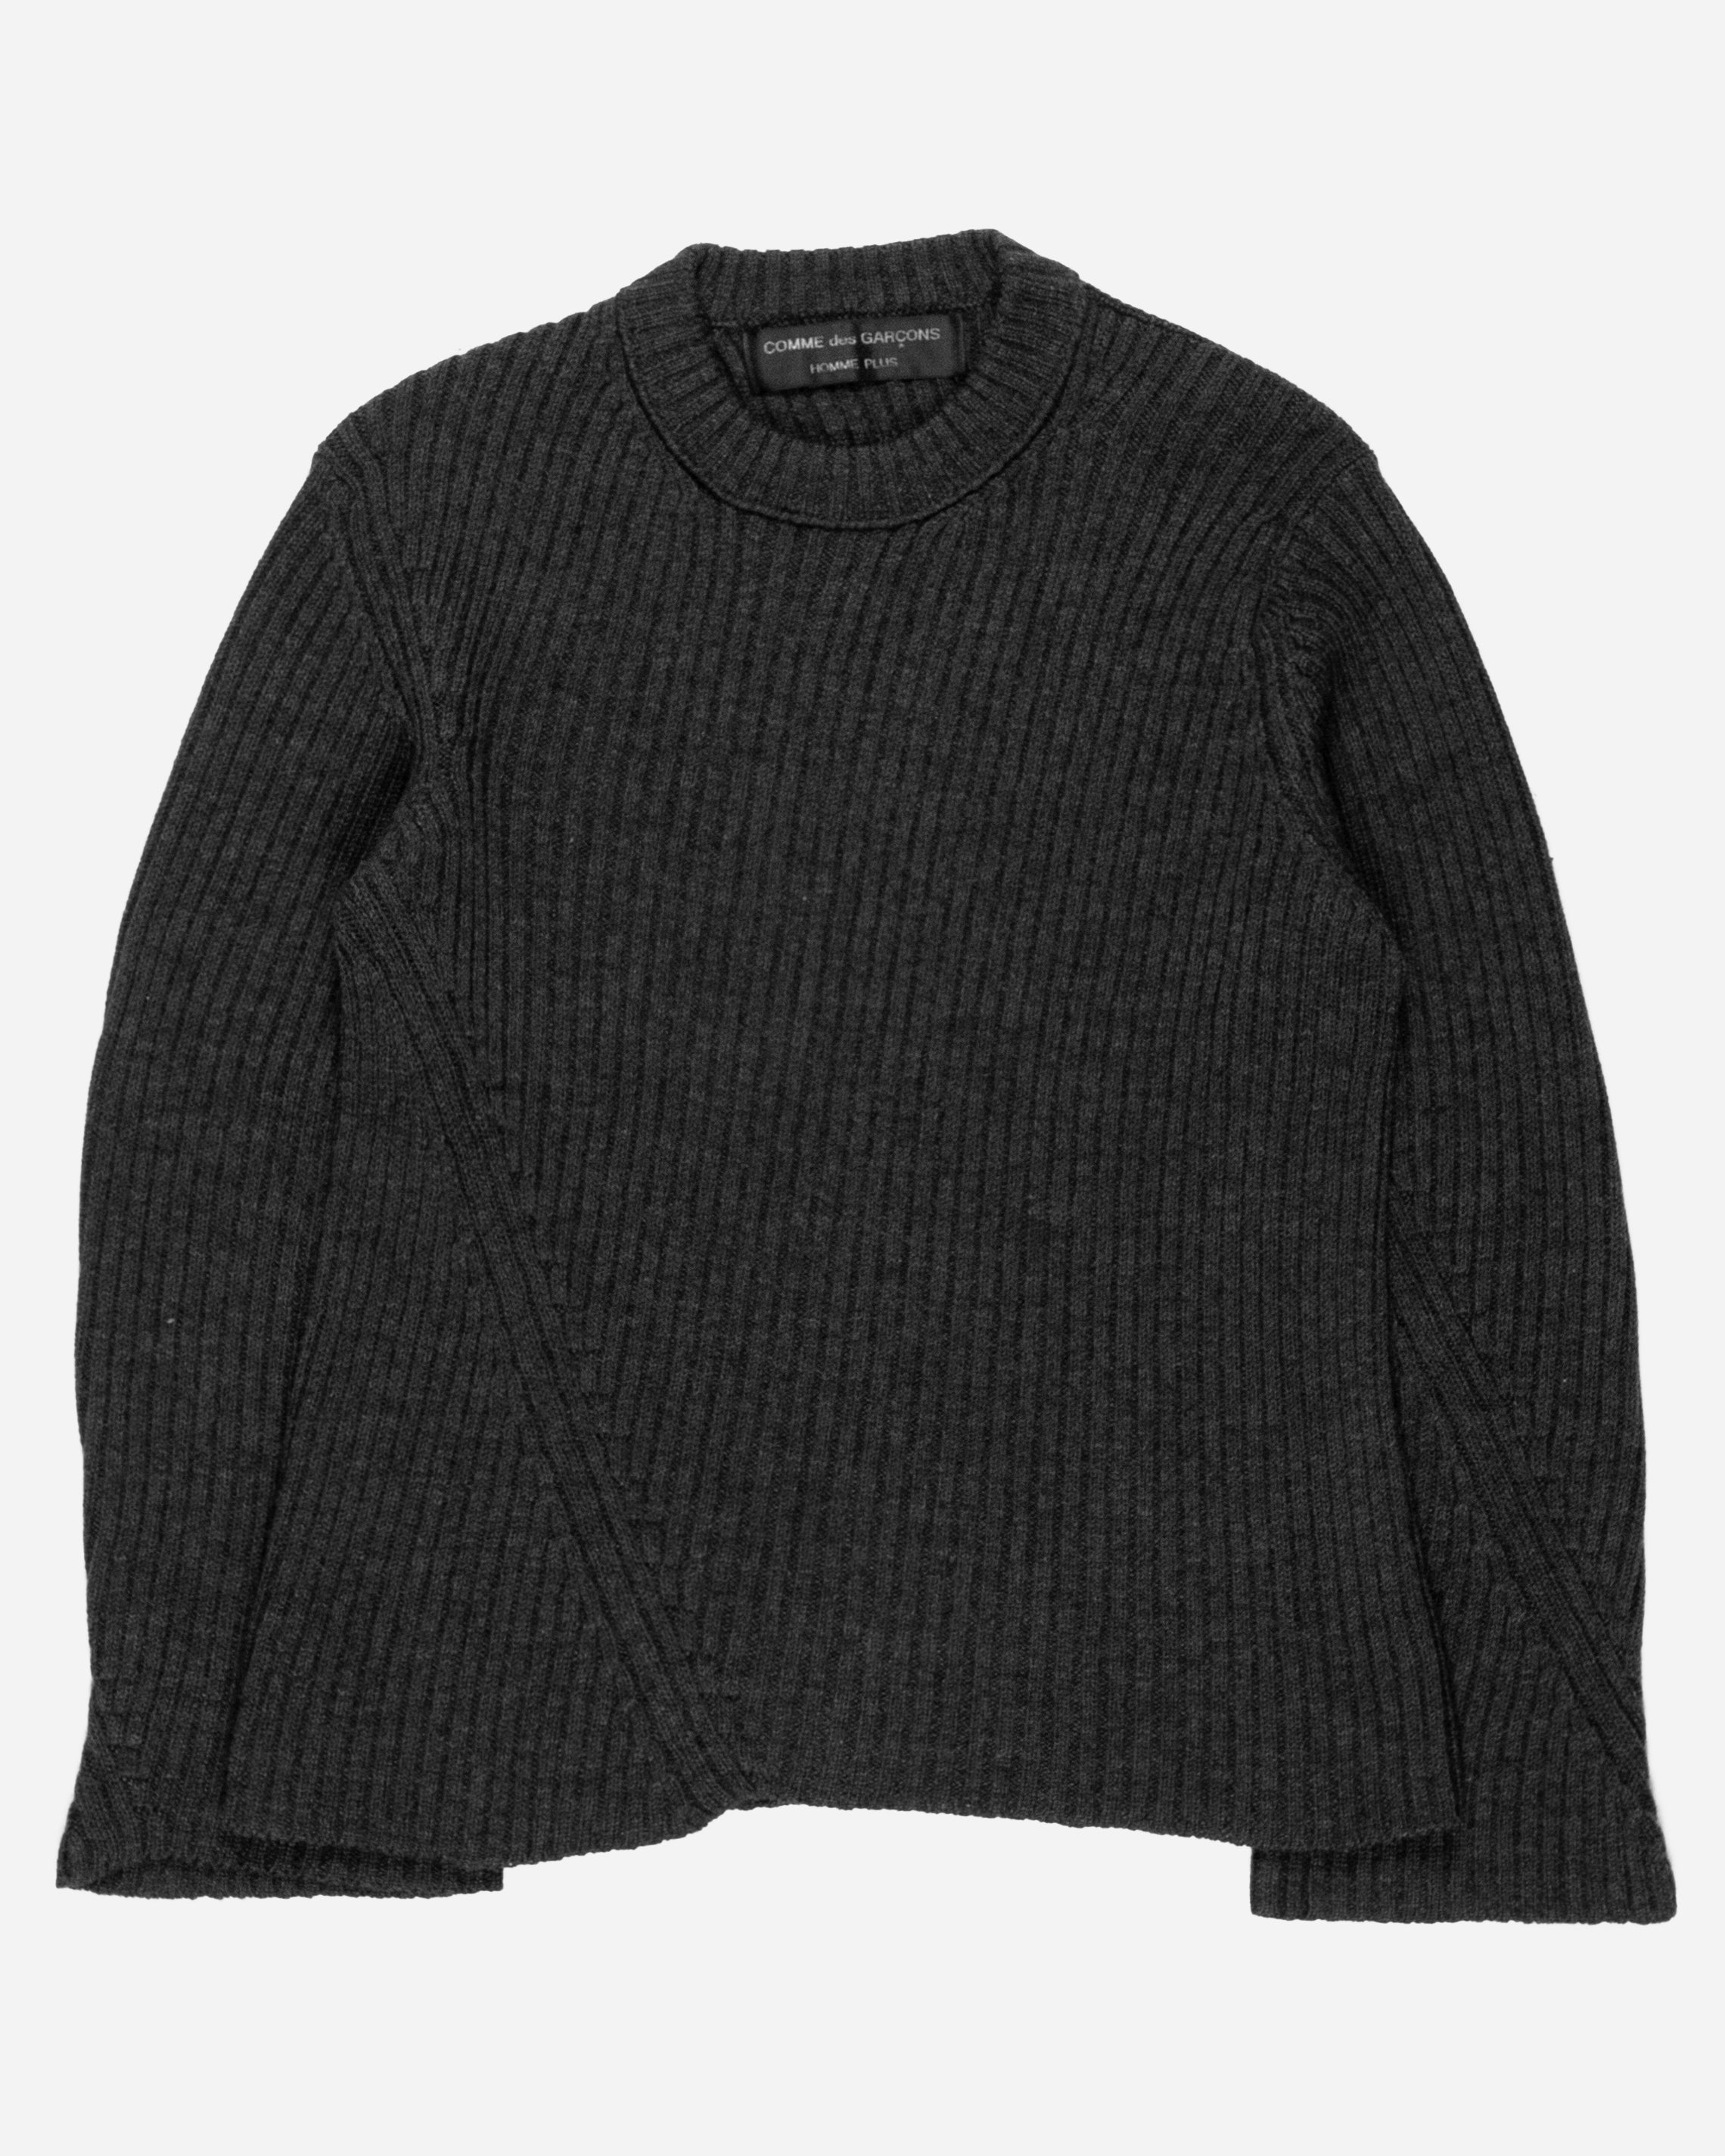 Comme des Garçons Homme Wool Knit Twisted Seam Sweater - AD1997 